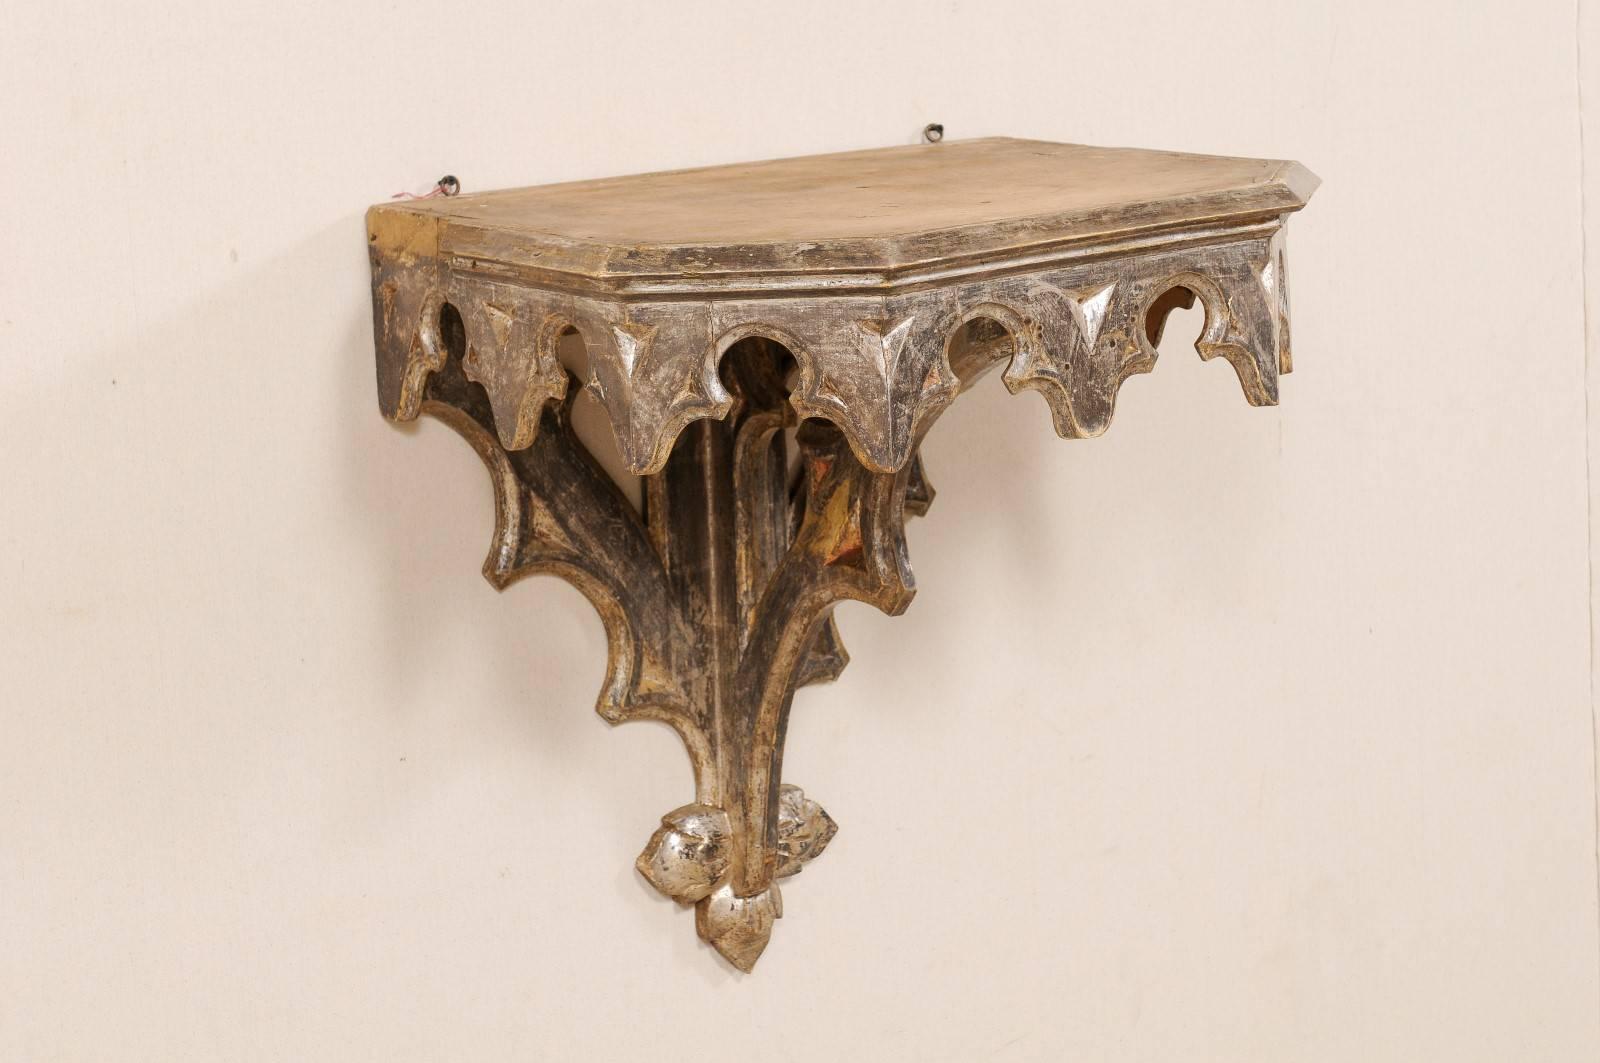 Carved Italian Wall-Mounted Small Table from the Early 19th Century, Metallic Accent